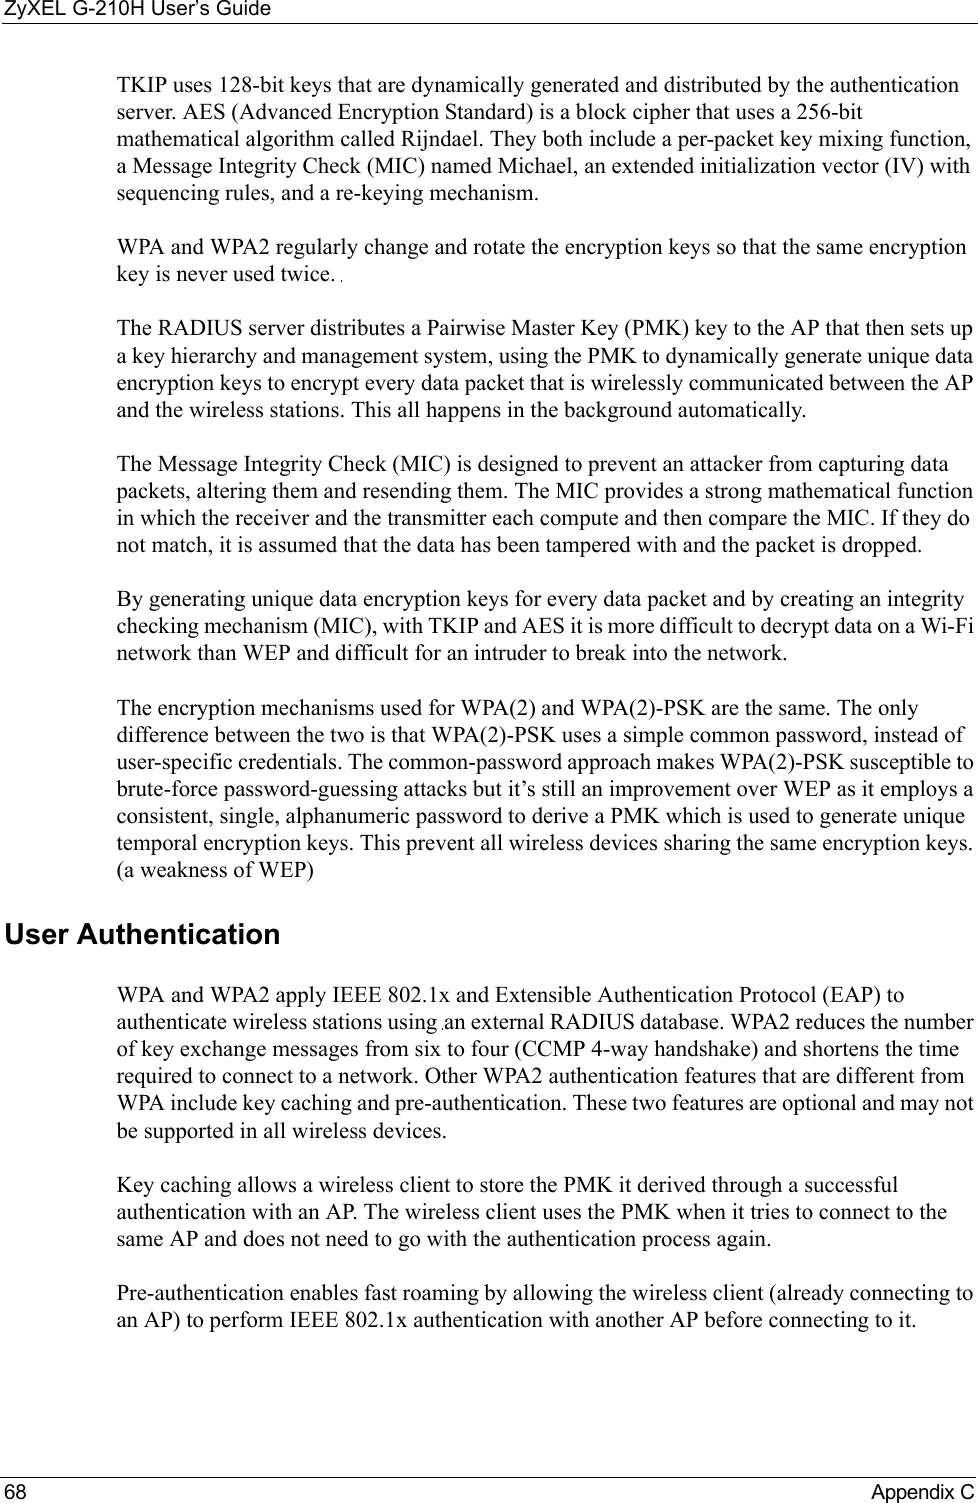 ZyXEL G-210H User’s Guide68 Appendix CTKIP uses 128-bit keys that are dynamically generated and distributed by the authentication server. AES (Advanced Encryption Standard) is a block cipher that uses a 256-bit mathematical algorithm called Rijndael. They both include a per-packet key mixing function, a Message Integrity Check (MIC) named Michael, an extended initialization vector (IV) with sequencing rules, and a re-keying mechanism.WPA and WPA2 regularly change and rotate the encryption keys so that the same encryption key is never used twice. The RADIUS server distributes a Pairwise Master Key (PMK) key to the AP that then sets up a key hierarchy and management system, using the PMK to dynamically generate unique data encryption keys to encrypt every data packet that is wirelessly communicated between the AP and the wireless stations. This all happens in the background automatically.The Message Integrity Check (MIC) is designed to prevent an attacker from capturing data packets, altering them and resending them. The MIC provides a strong mathematical function in which the receiver and the transmitter each compute and then compare the MIC. If they do not match, it is assumed that the data has been tampered with and the packet is dropped. By generating unique data encryption keys for every data packet and by creating an integrity checking mechanism (MIC), with TKIP and AES it is more difficult to decrypt data on a Wi-Fi network than WEP and difficult for an intruder to break into the network. The encryption mechanisms used for WPA(2) and WPA(2)-PSK are the same. The only difference between the two is that WPA(2)-PSK uses a simple common password, instead of user-specific credentials. The common-password approach makes WPA(2)-PSK susceptible to brute-force password-guessing attacks but it’s still an improvement over WEP as it employs a consistent, single, alphanumeric password to derive a PMK which is used to generate unique temporal encryption keys. This prevent all wireless devices sharing the same encryption keys. (a weakness of WEP)User Authentication WPA and WPA2 apply IEEE 802.1x and Extensible Authentication Protocol (EAP) to authenticate wireless stations using an external RADIUS database. WPA2 reduces the number of key exchange messages from six to four (CCMP 4-way handshake) and shortens the time required to connect to a network. Other WPA2 authentication features that are different from WPA include key caching and pre-authentication. These two features are optional and may not be supported in all wireless devices.Key caching allows a wireless client to store the PMK it derived through a successful authentication with an AP. The wireless client uses the PMK when it tries to connect to the same AP and does not need to go with the authentication process again.Pre-authentication enables fast roaming by allowing the wireless client (already connecting to an AP) to perform IEEE 802.1x authentication with another AP before connecting to it.